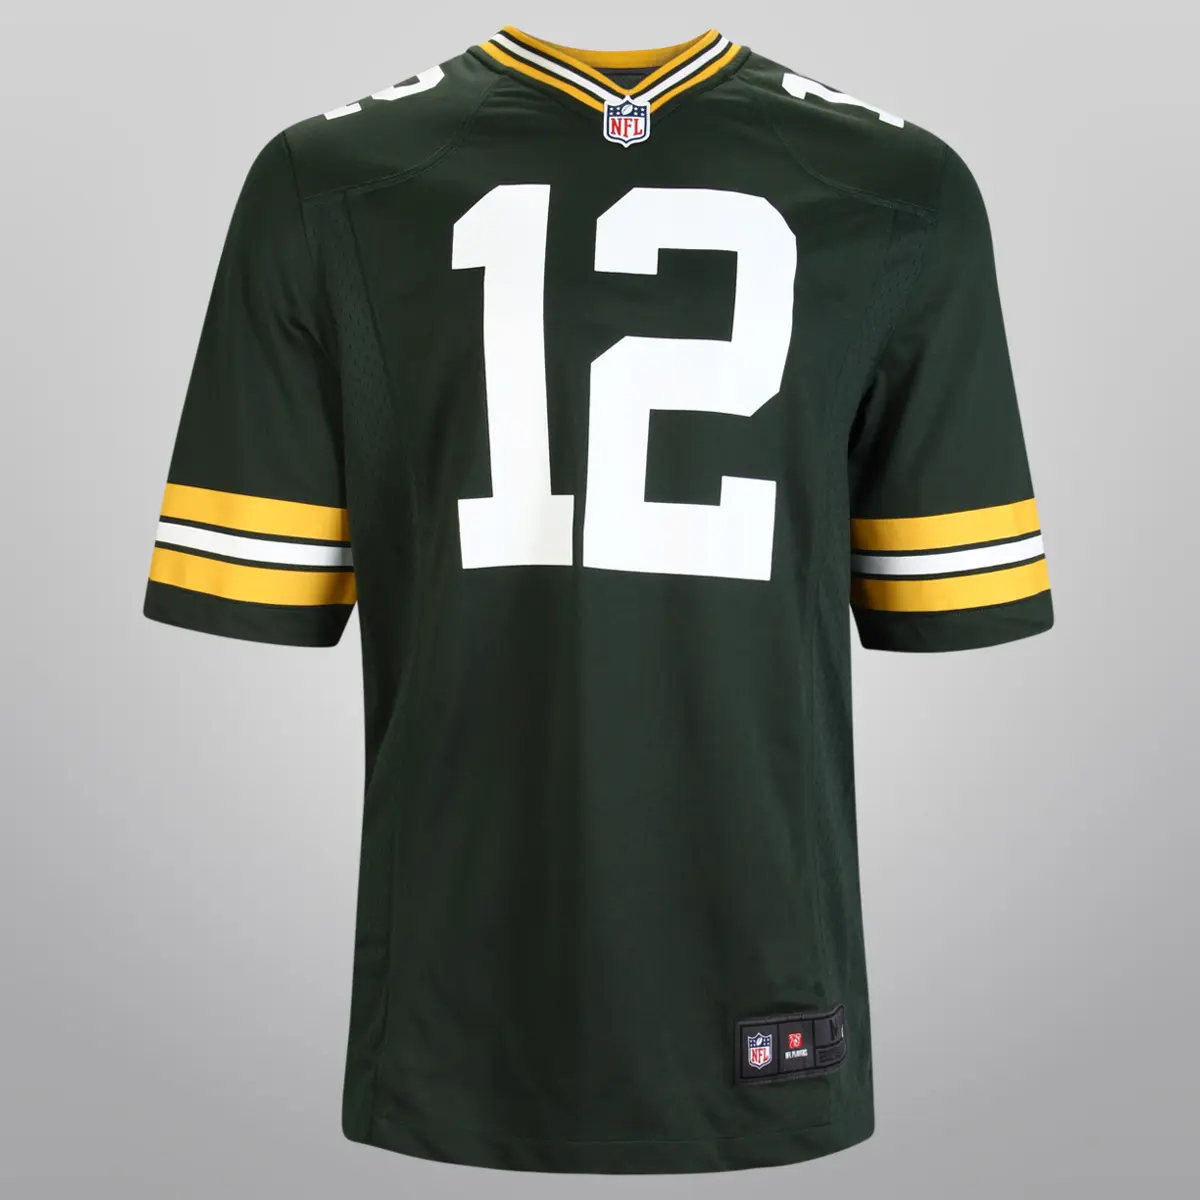 Nuevo 12 Green Bay Packers Aaron Rodgers Jersey para hombre